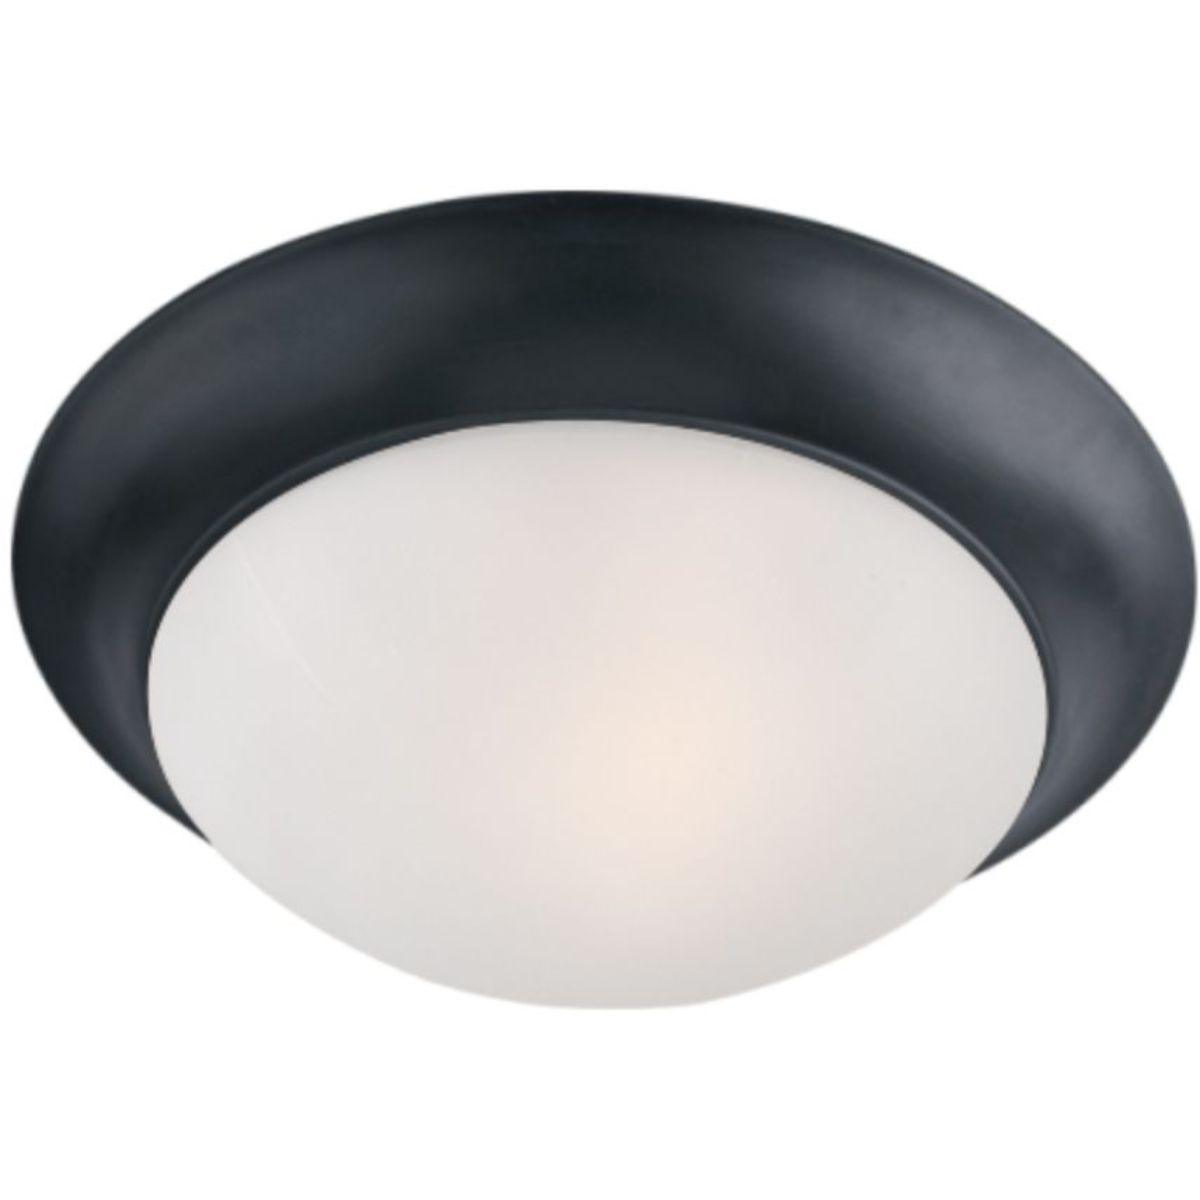 Essentials-585x 14 in. 2 Lights Flush Mount Light Frosted Glass